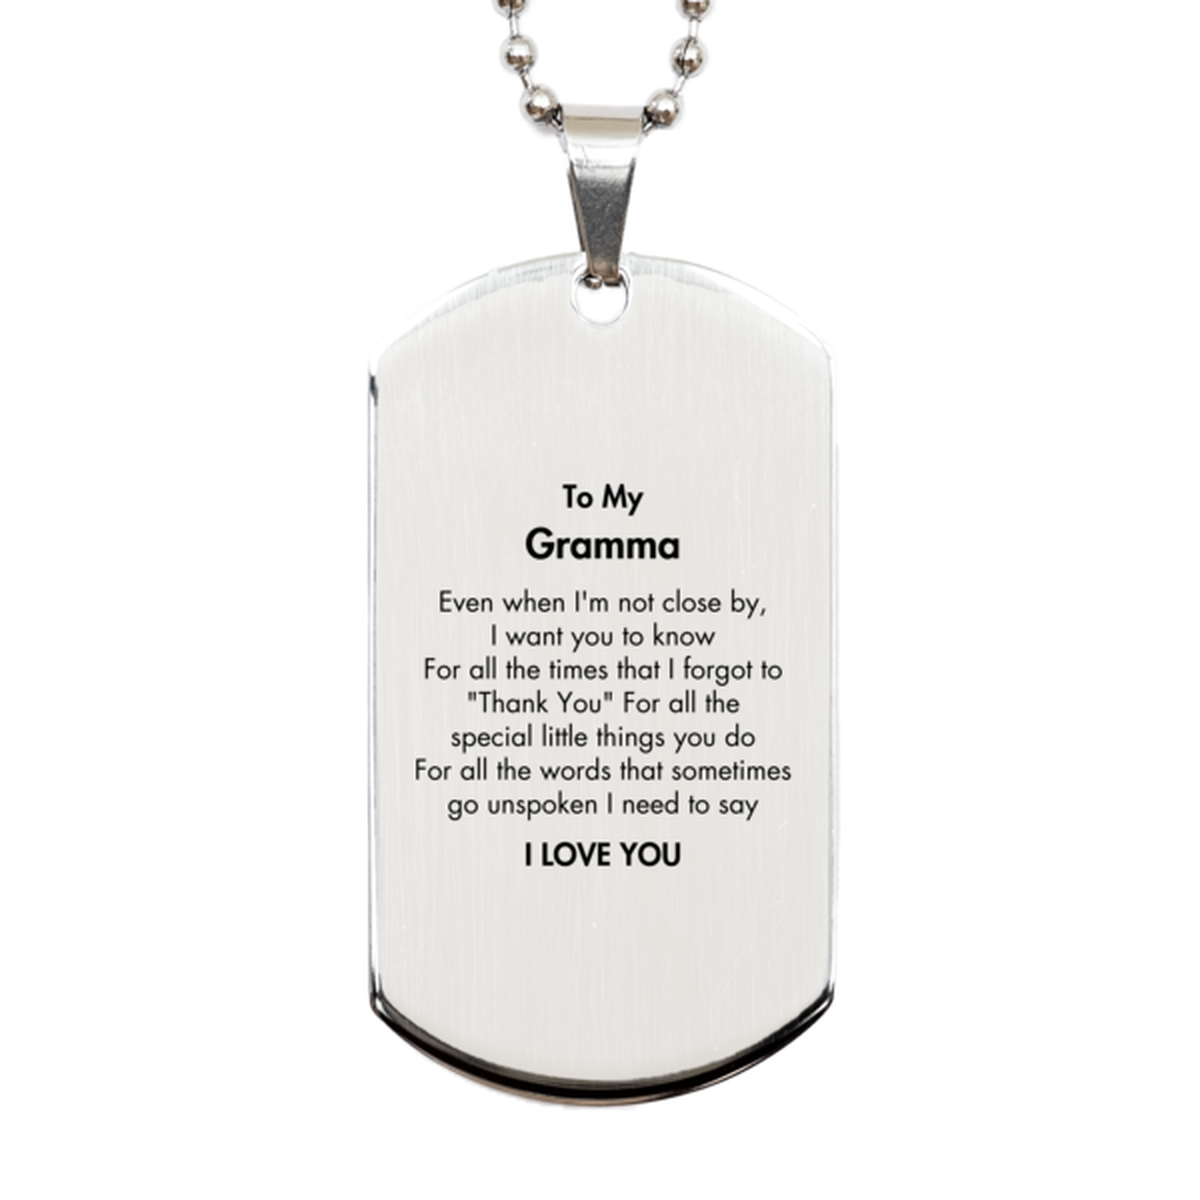 Thank You Gifts for Gramma, Keepsake Silver Dog Tag Gifts for Gramma Birthday Mother's day Father's Day Gramma For all the words That sometimes go unspoken I need to say I LOVE YOU